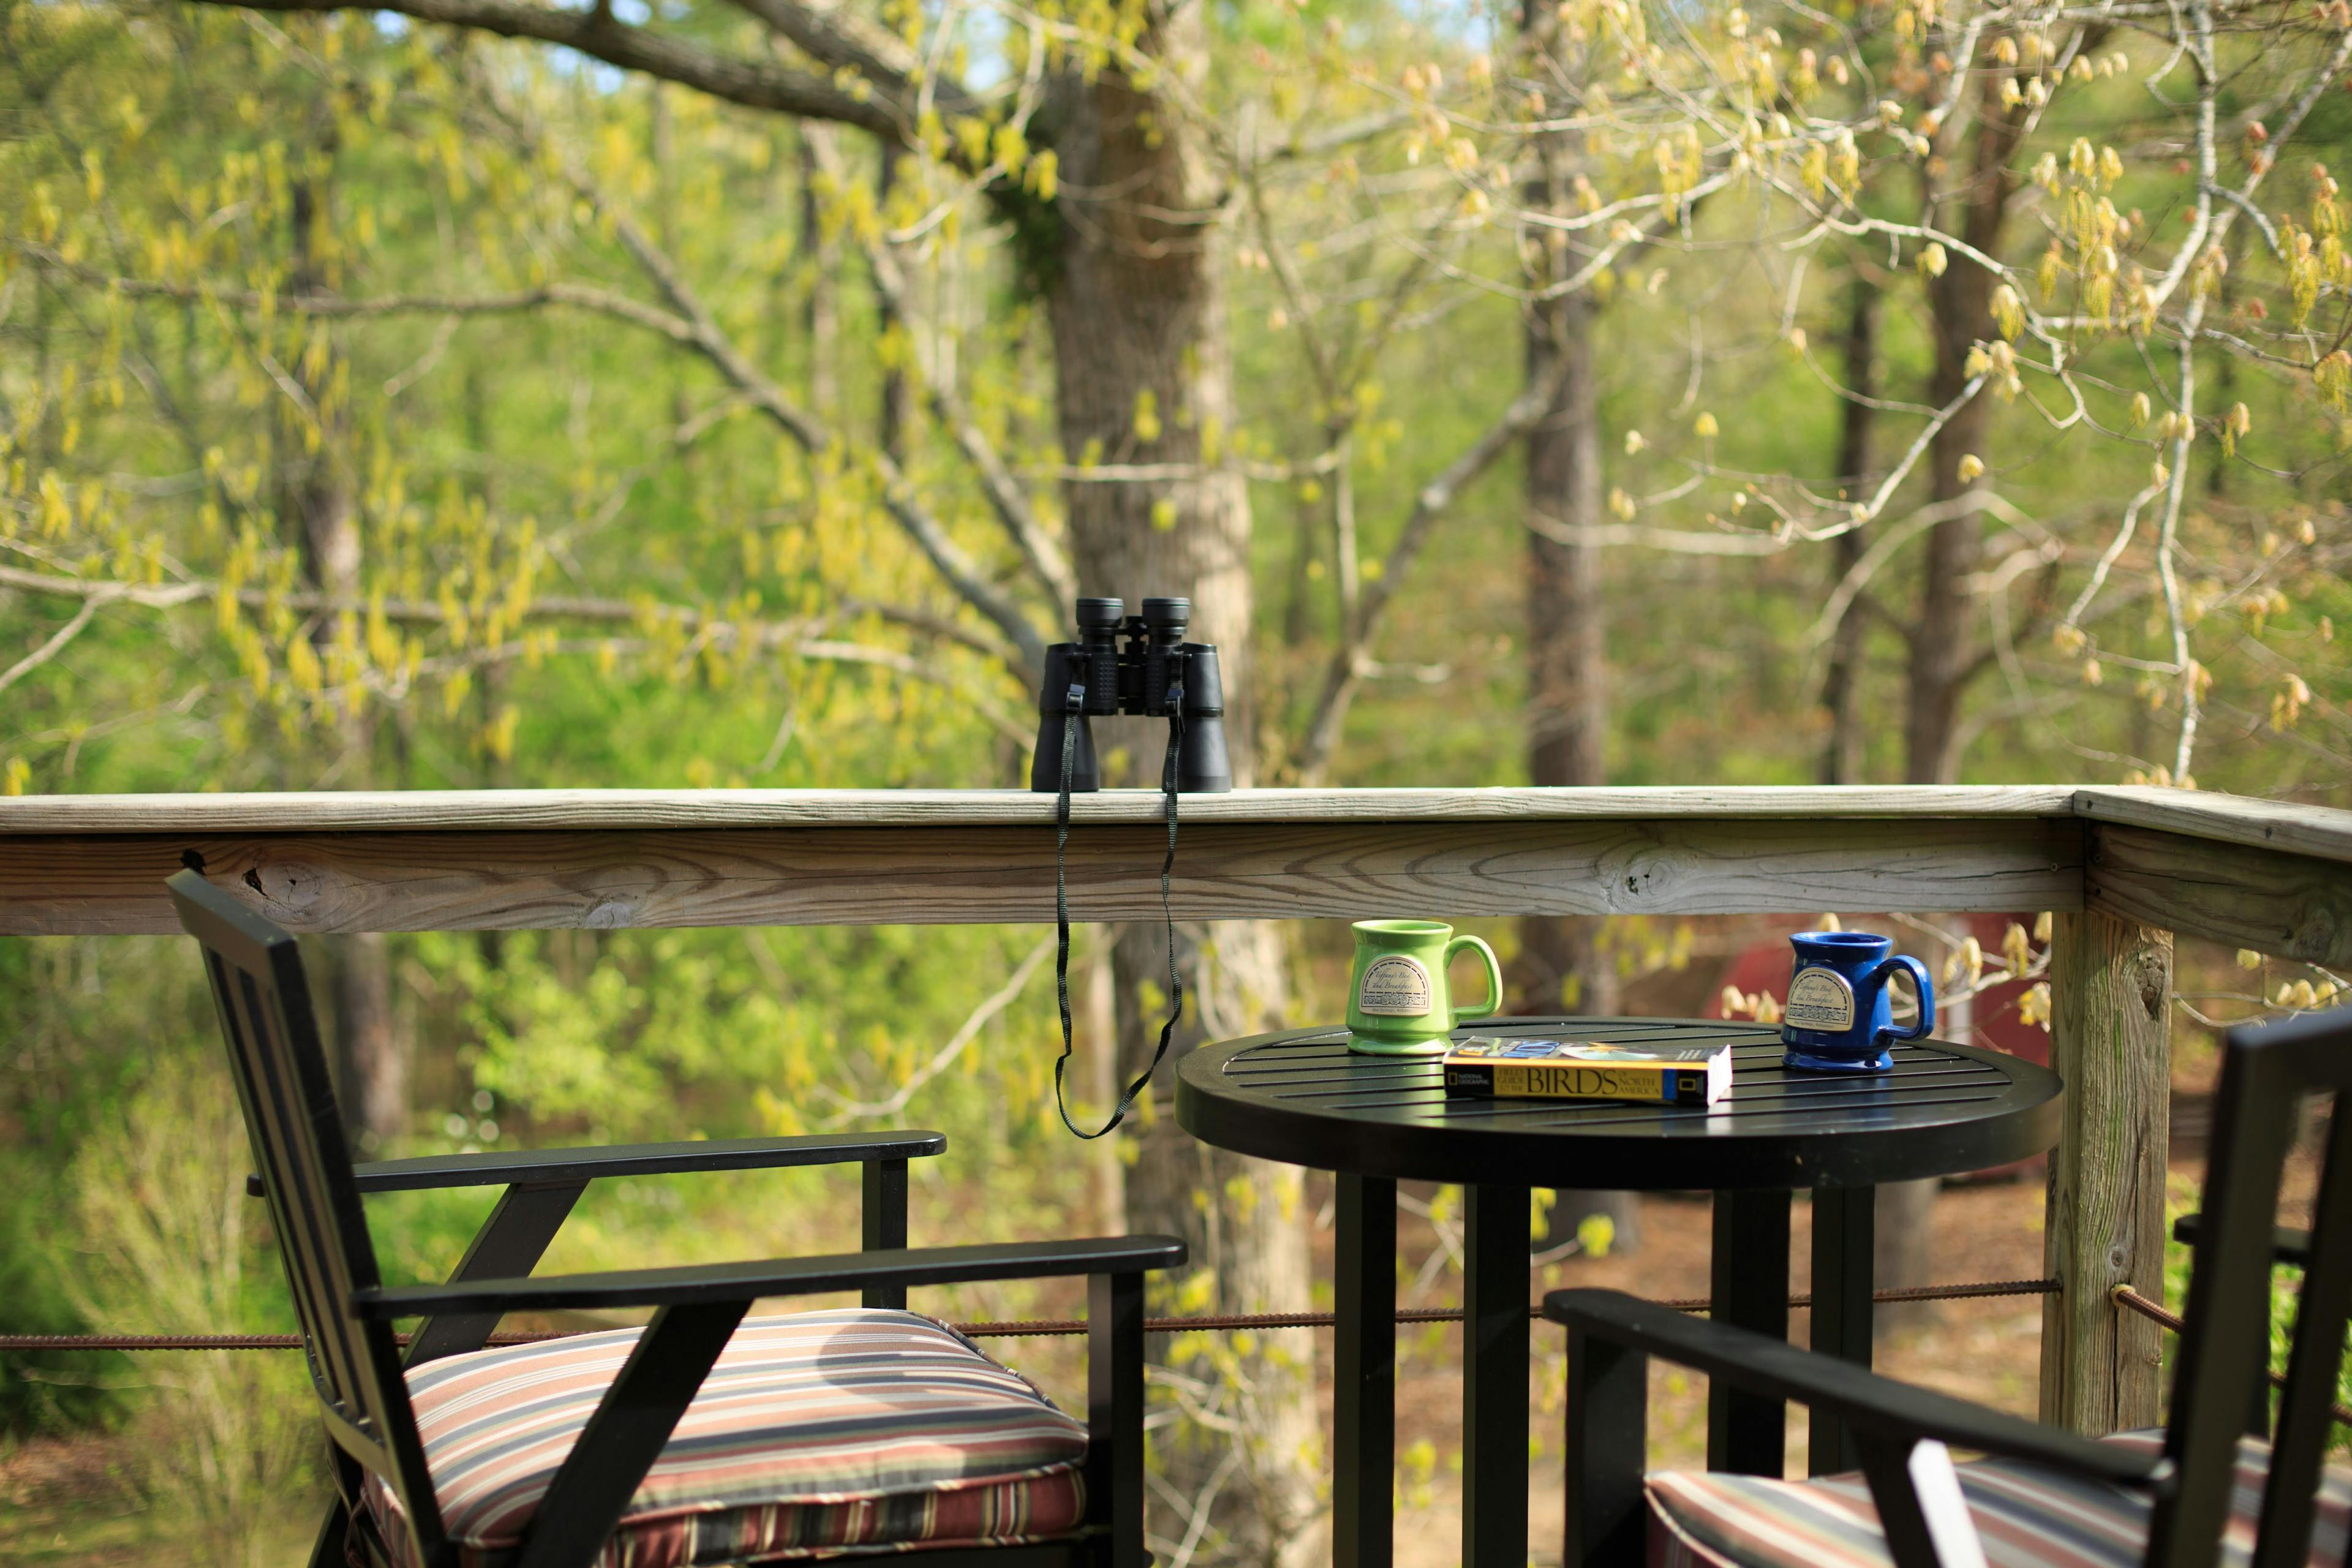 A deck with a wooden rail.  There are 2 black metal chairs with chair pads and a table in between them.  On top of the table is a book and 2 coffee mugs. On the wooden rail is a pair of binoculars.  There are numerous trees in the background.